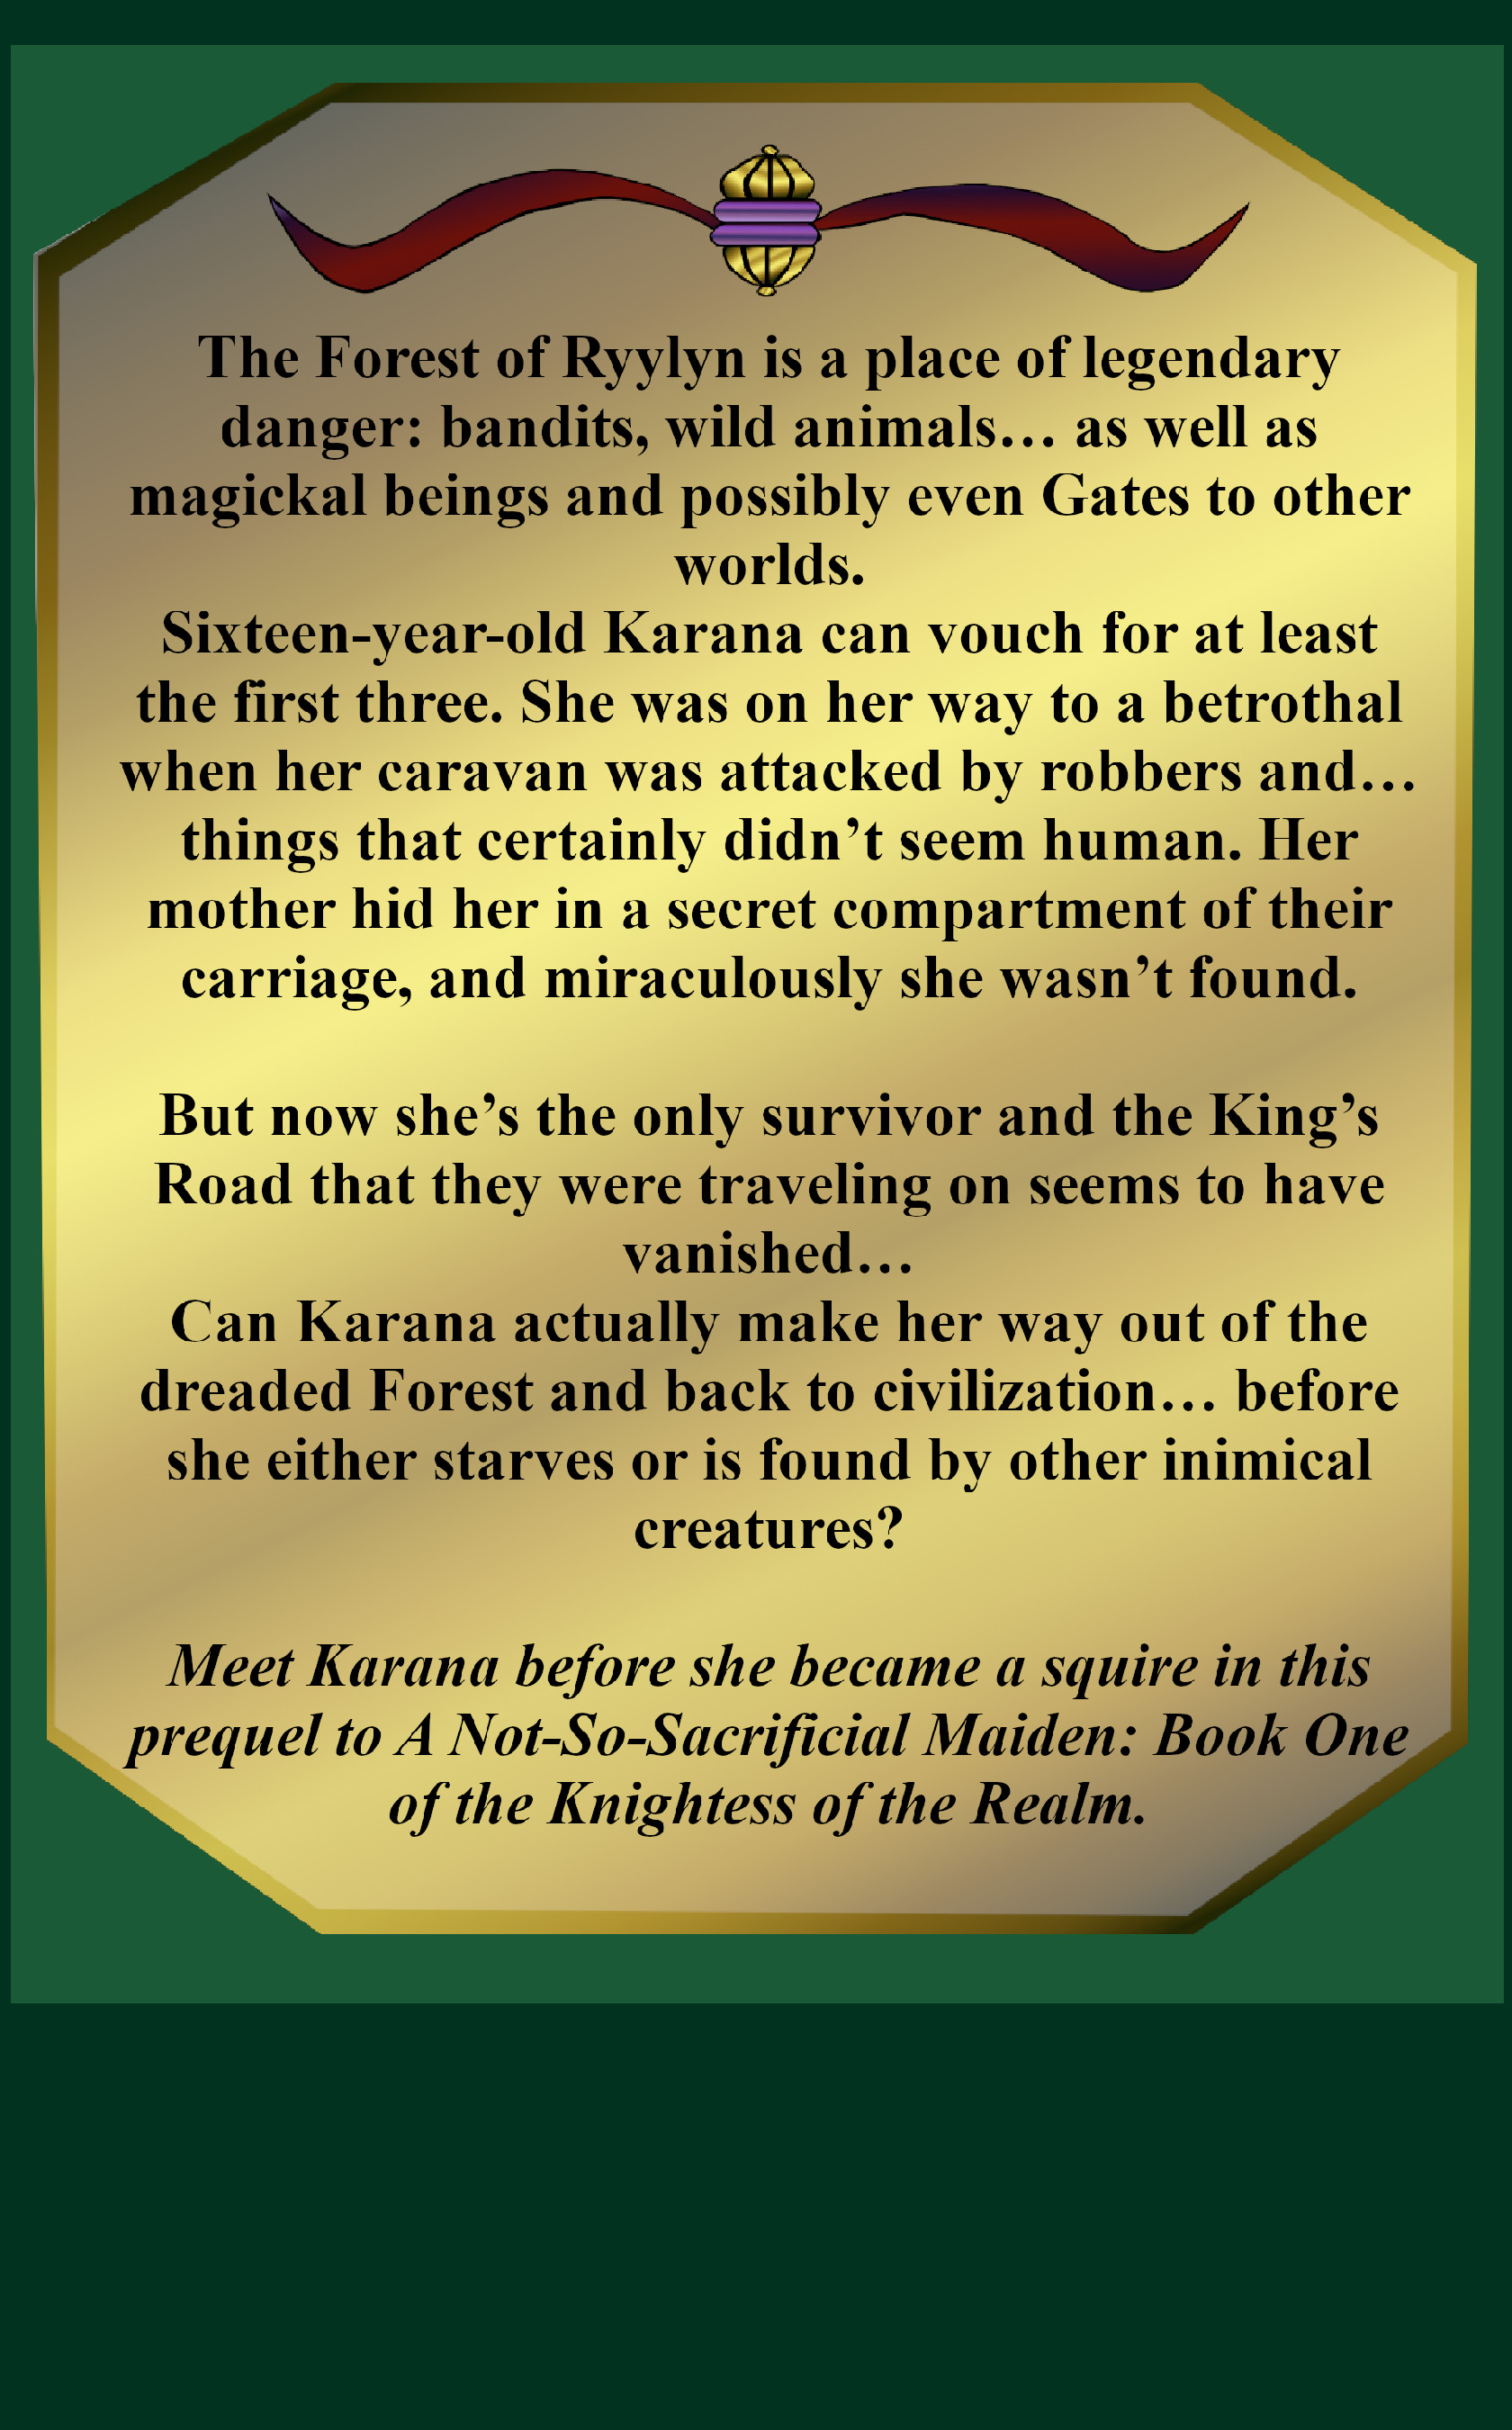 Back Blurb for book: Out of the Woods... Hopefully, A Knightess of the Realm Prequel